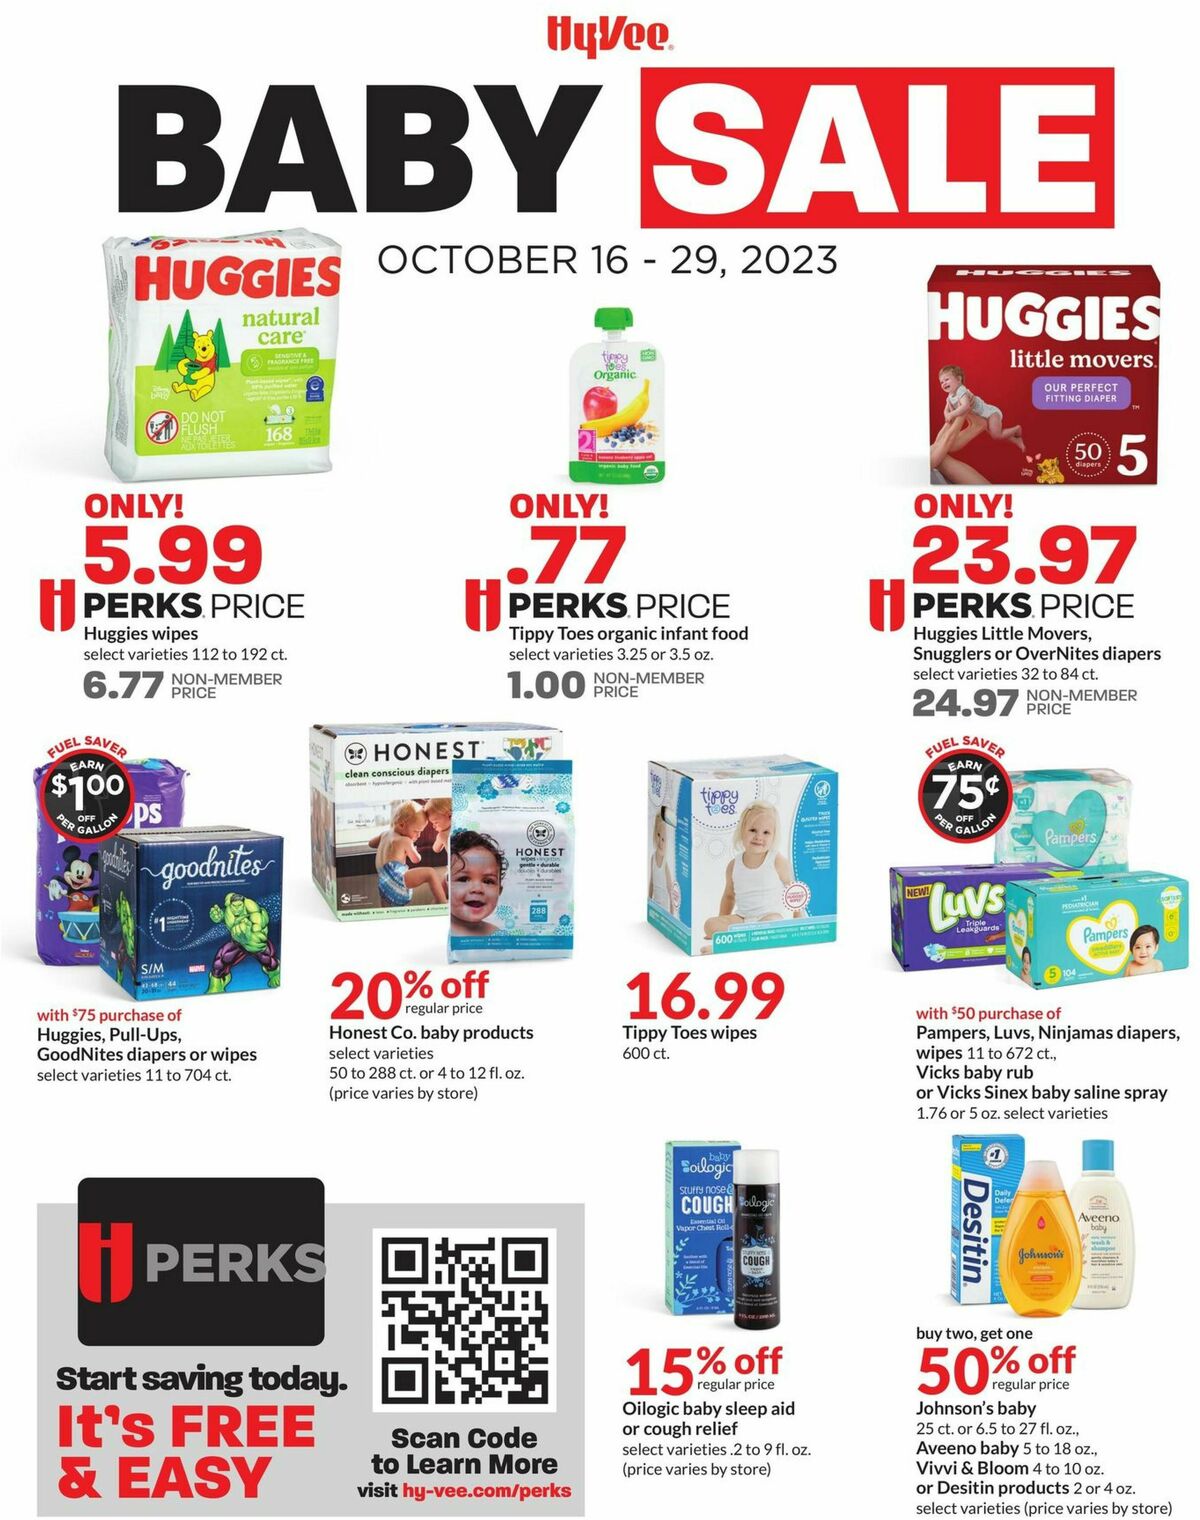 Hy-Vee Baby Sale Weekly Ad from October 16